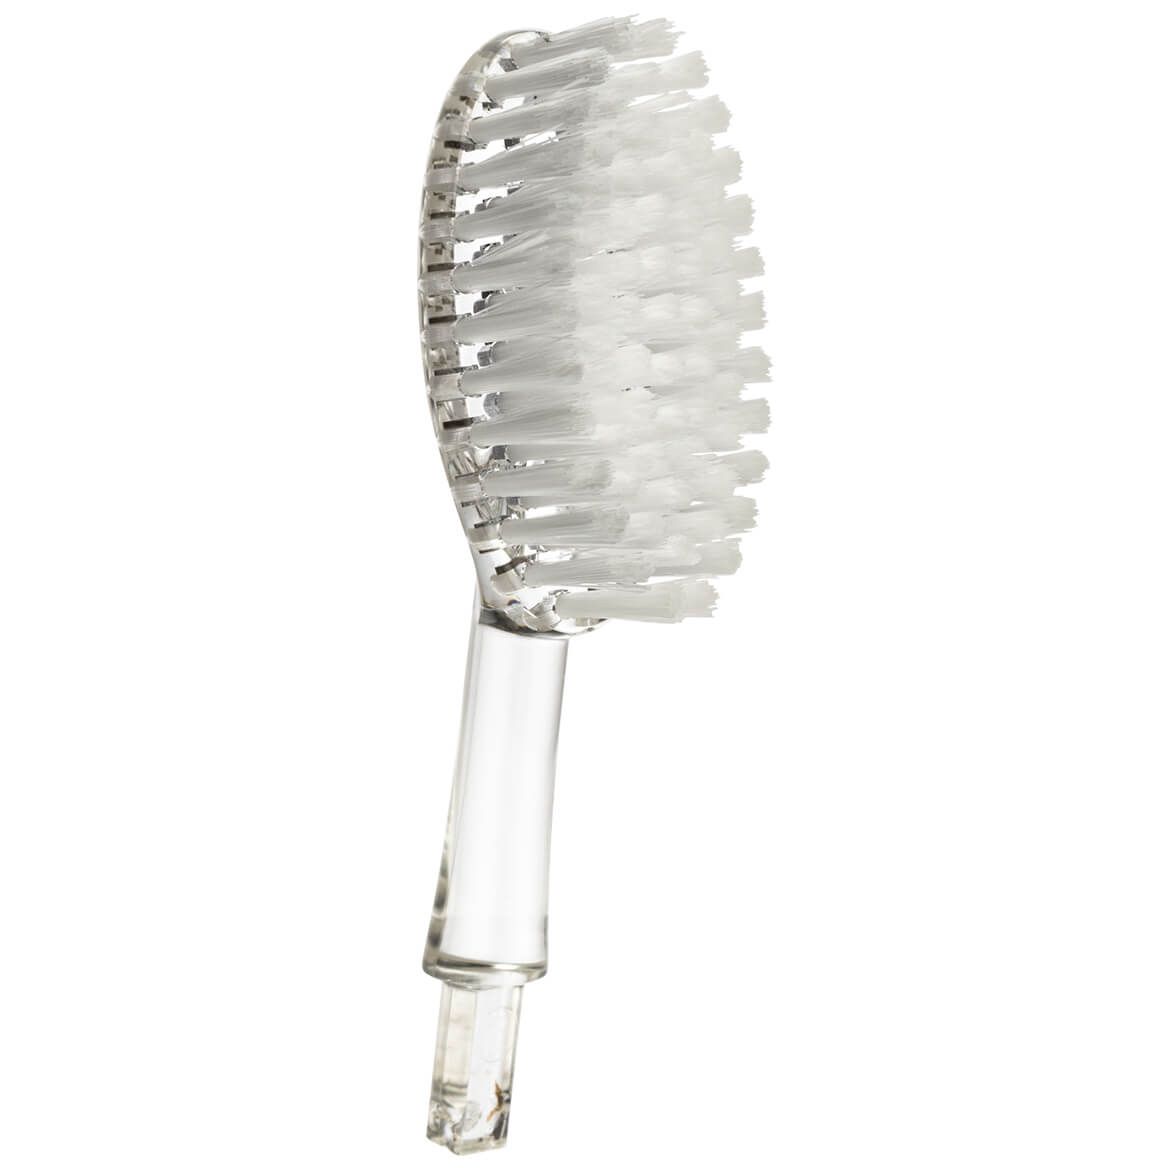 Big Brush™ Easy Grip Toothbrush Soft Replacement Heads, 2 Pack + '-' + 373943